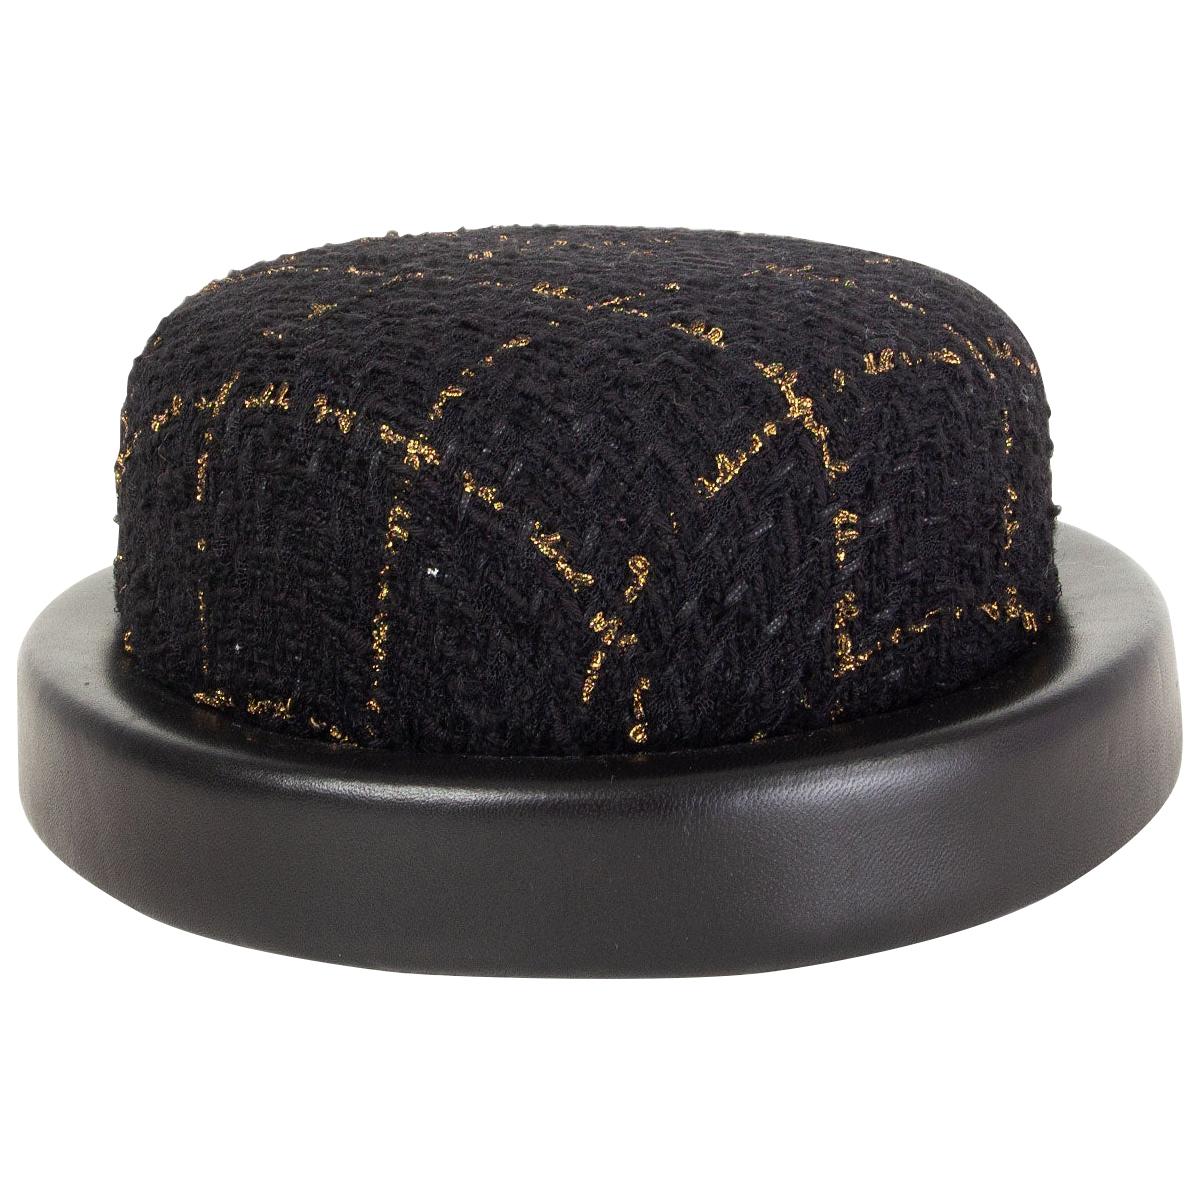 CHANEL black & gold 2016 LEATHER TRIM TWEED RIDING Hat S